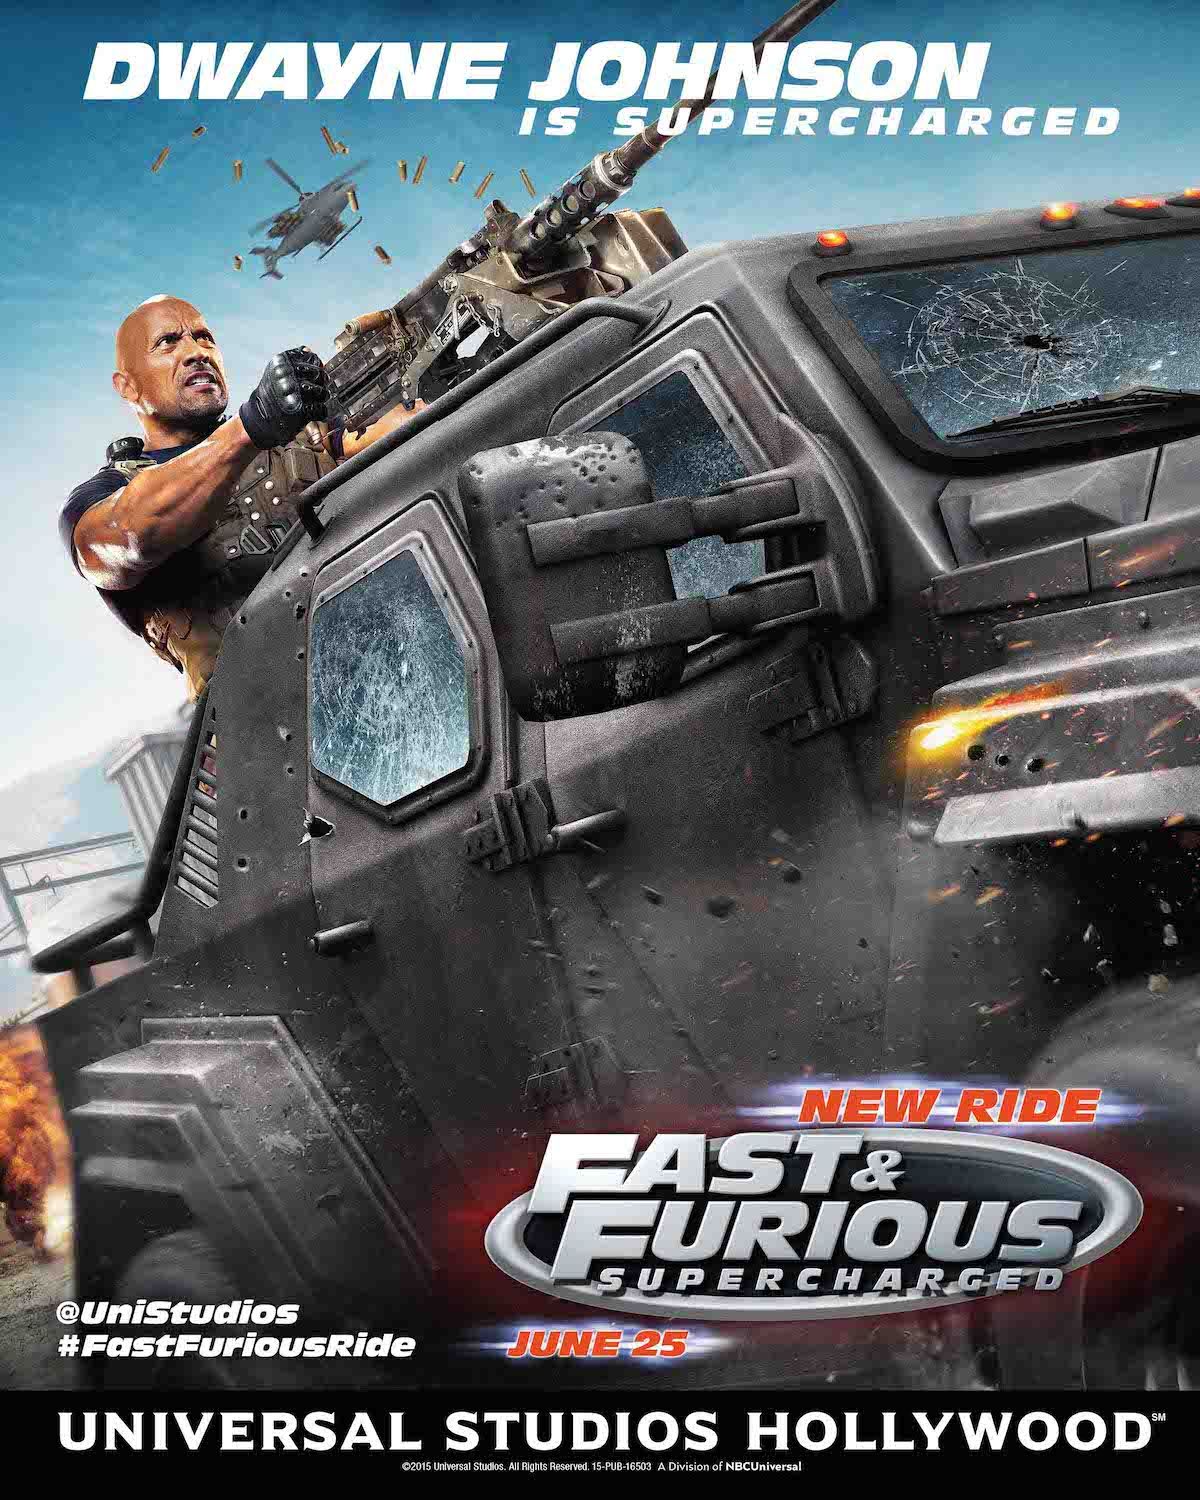 Fast Furious-Supercharged Dwayne Johnson image